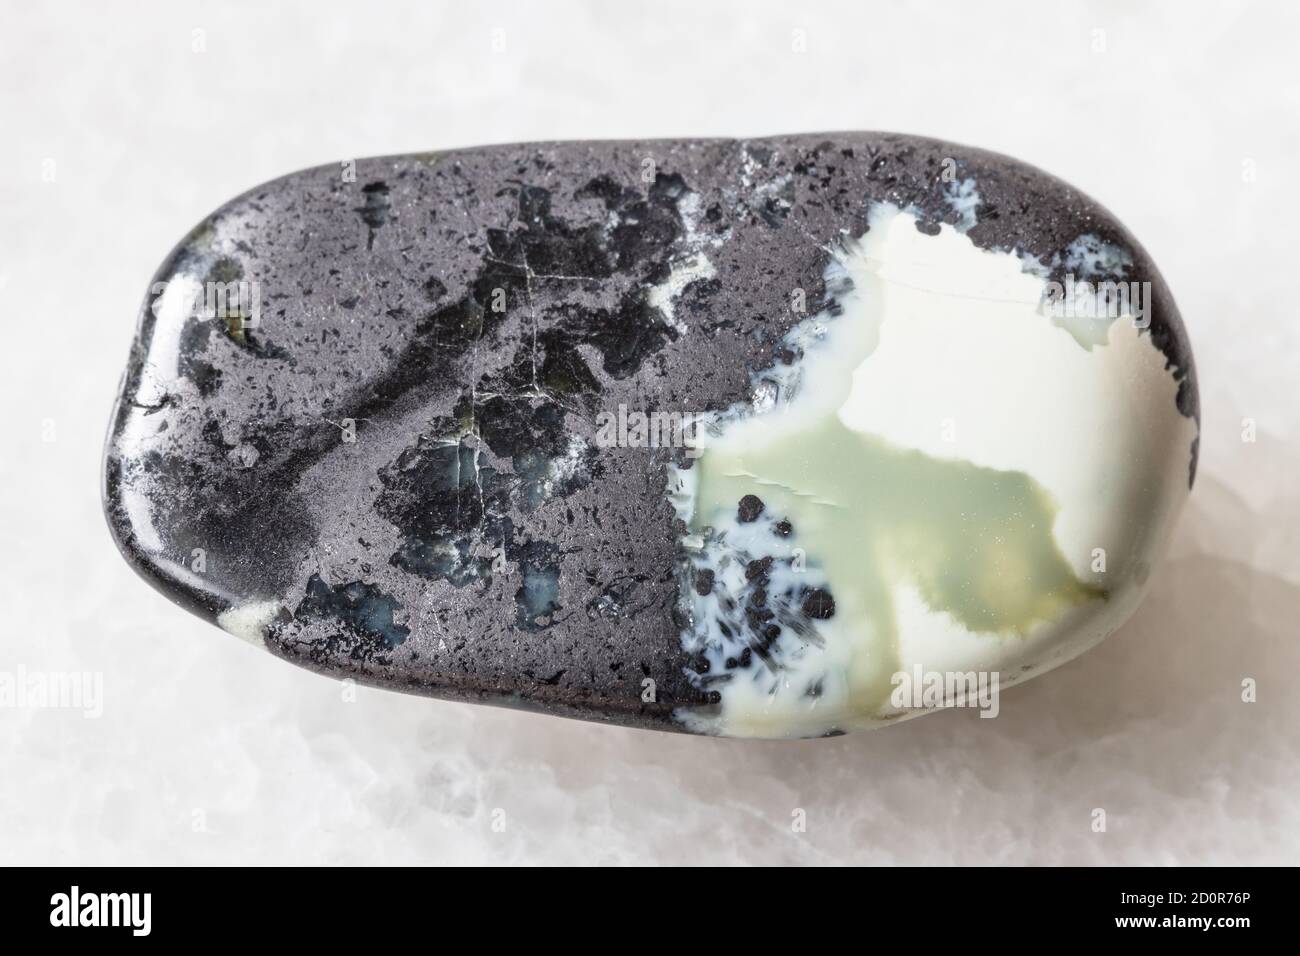 natural mineral from geological collection - polished Teisky Jade (Hantigyrite, khakassian serpentine) rock with Magnetite, Serpentine, Hematite miner Stock Photo